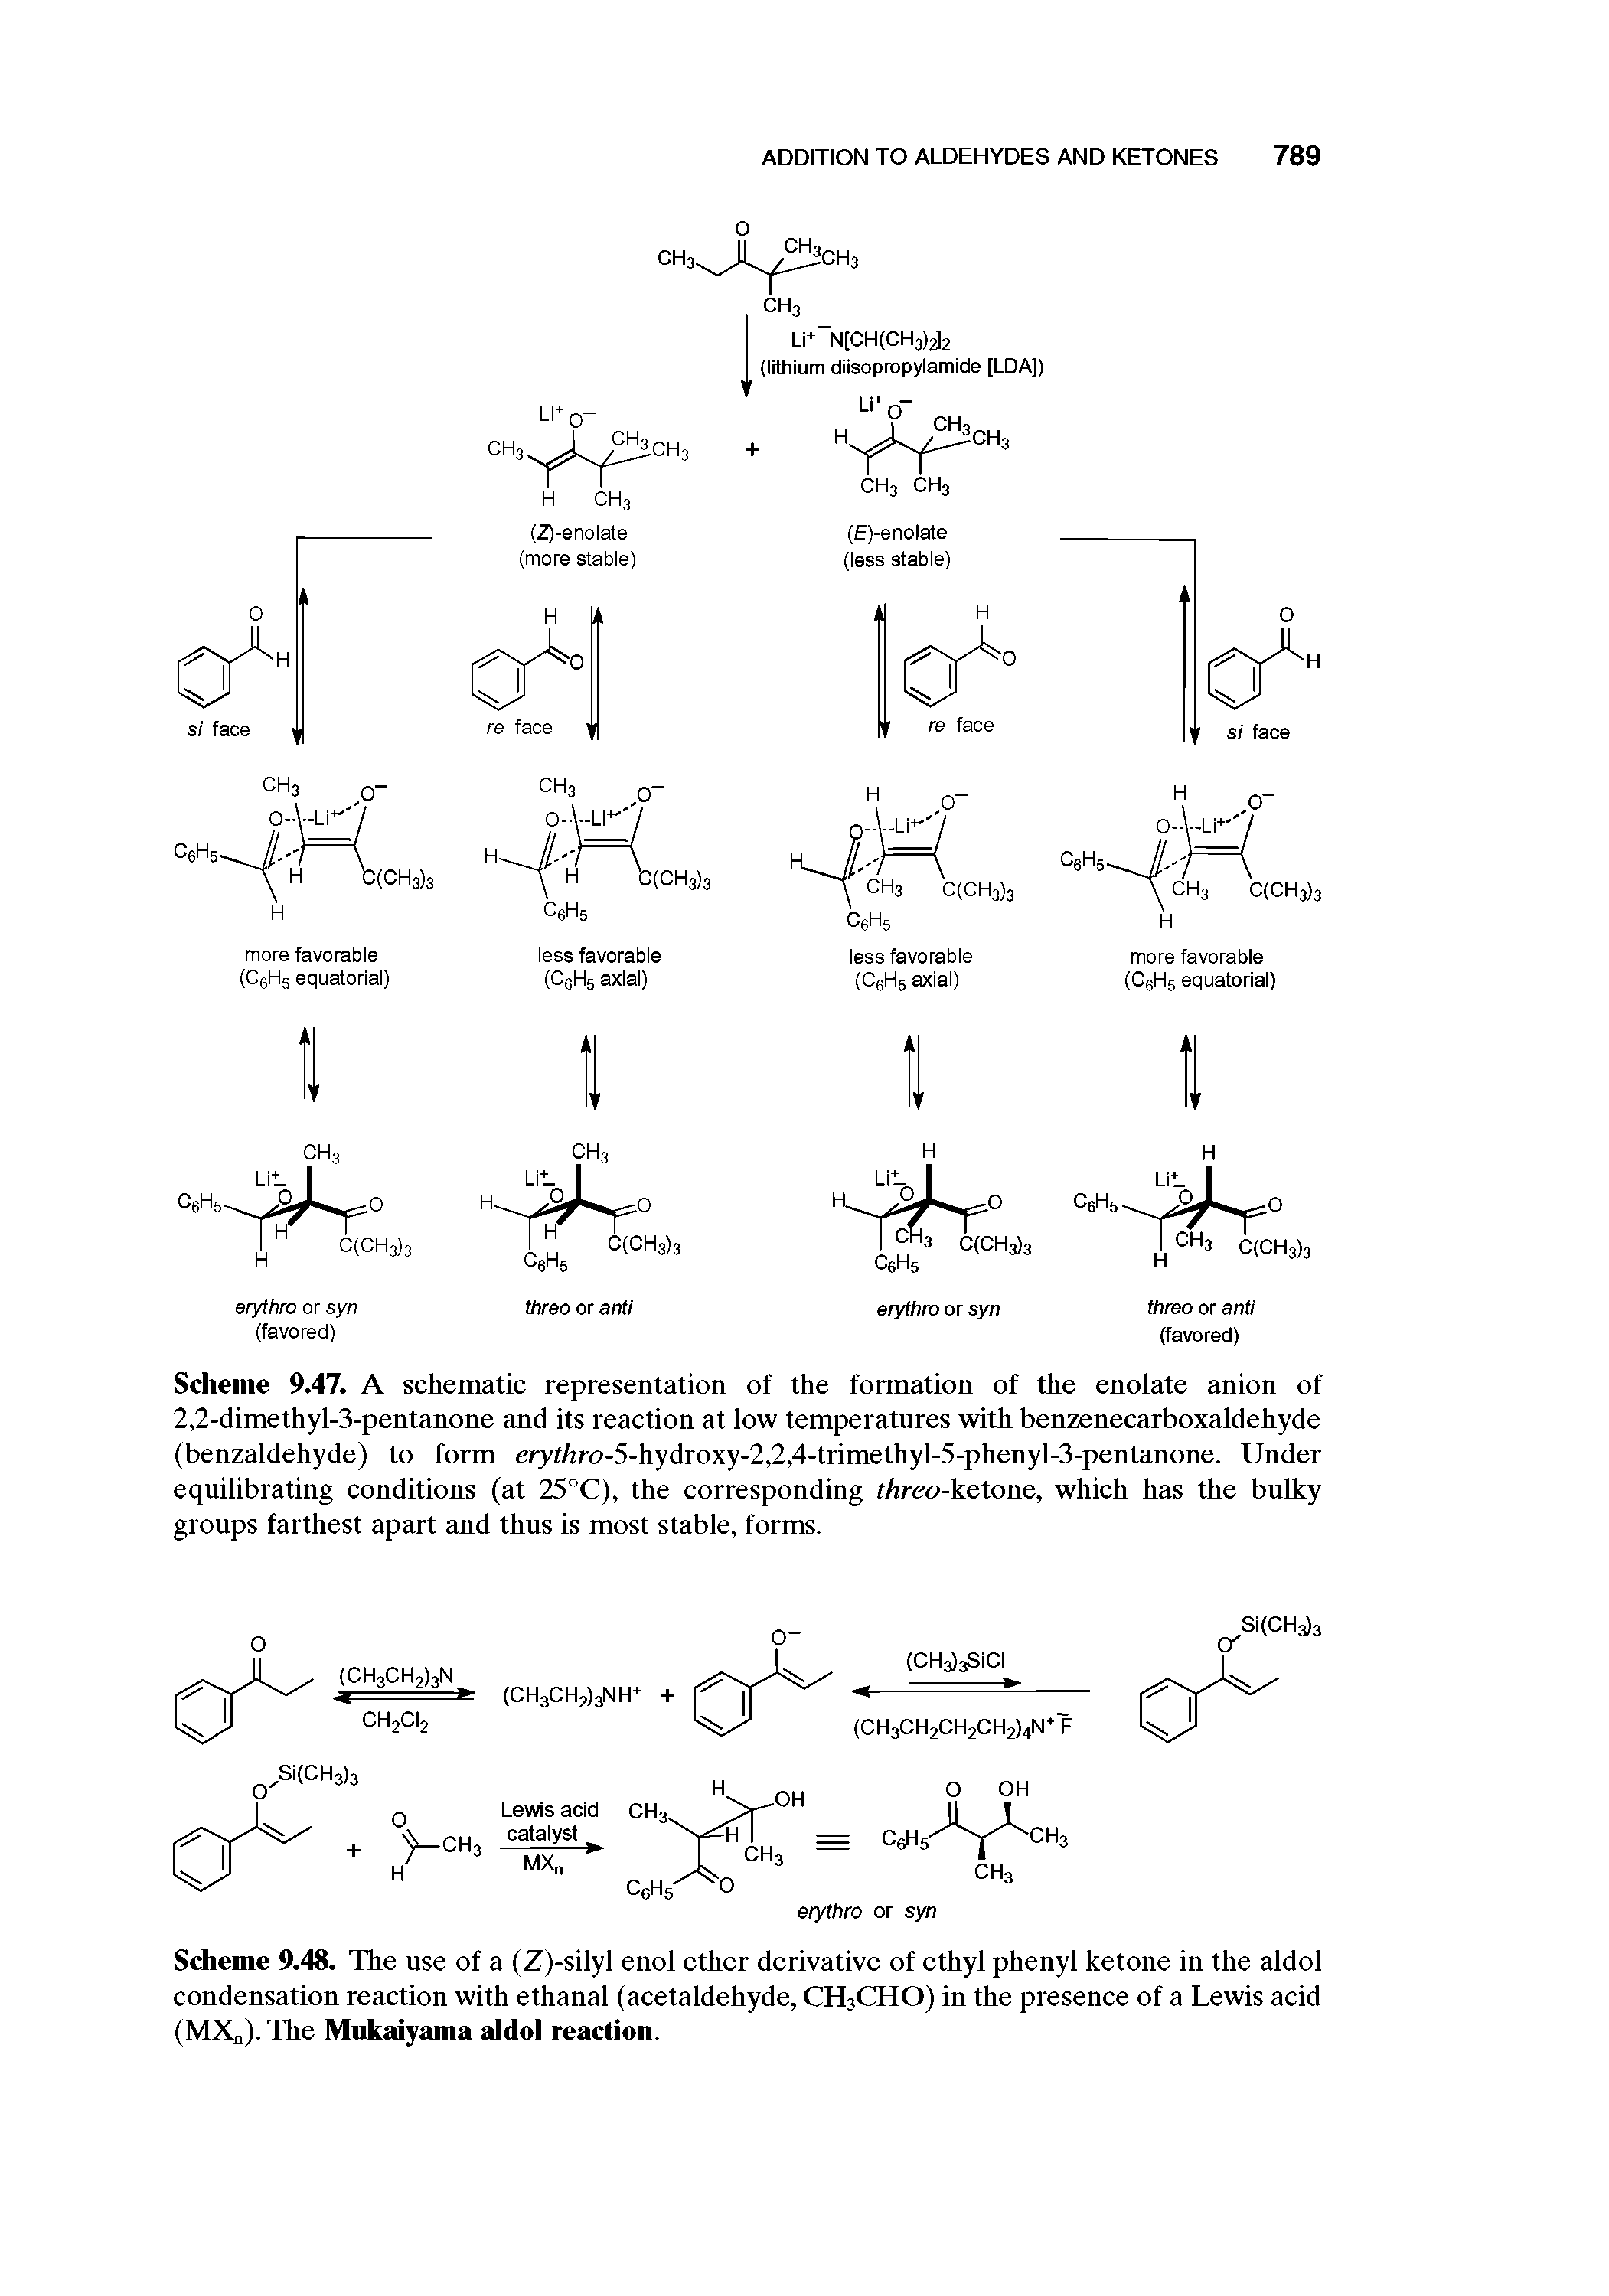 Scheme 9.48. The use of a (Z)-silyl enol ether derivative of ethyl phenyl ketone in the aldol condensation reaction with ethanal (acetaldehyde, CH3CHO) in the presence of a Lewis acid (MXn). The Miikaiyama aldol reaction.